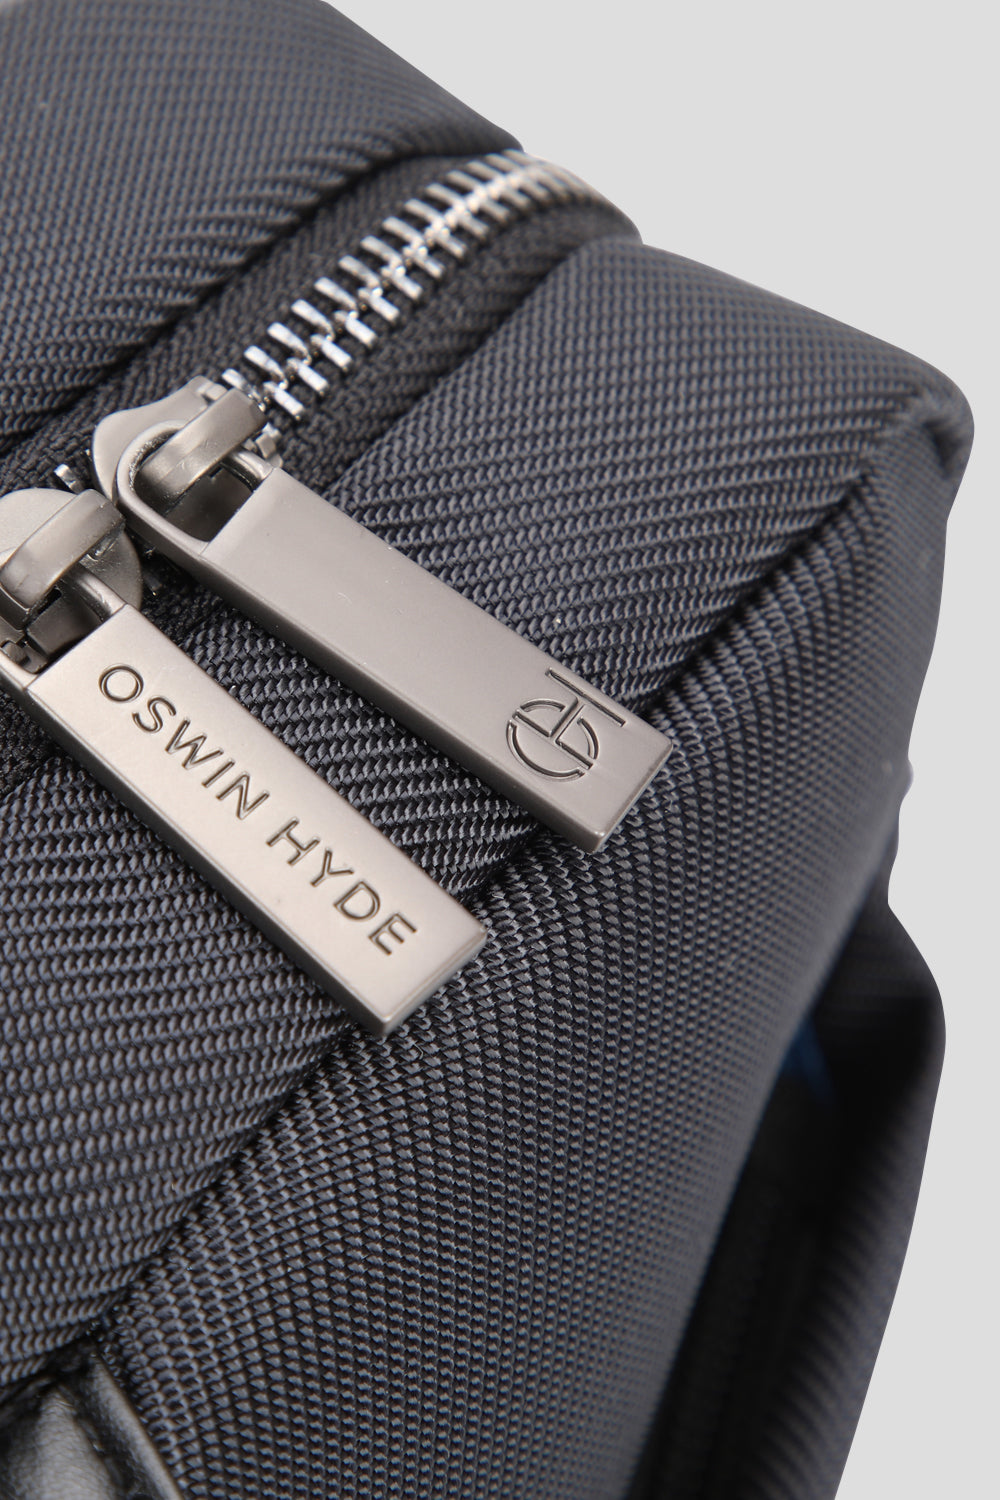 Clapton bag in navy colour laptop bag for men from oswin hyde